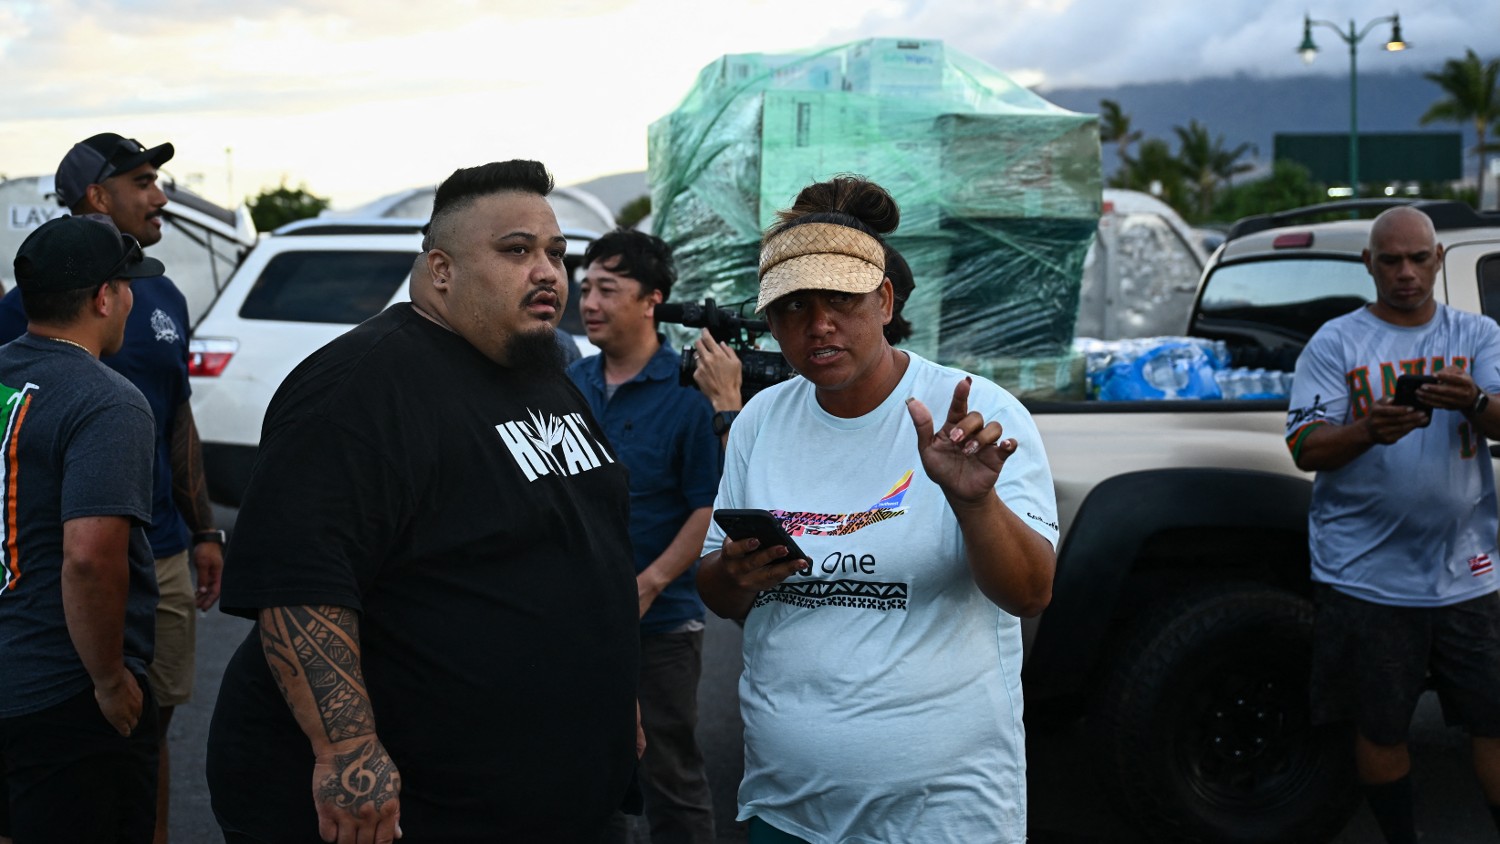 Volunteers Kale Kahele (L) and Kanani Adolpho help organise donations as volunteers load pallets of supplies and aid donations flown in from the Hawaiian island of Kauai at the Kahului airport cargo terminal in the aftermath Maui wildfires on 13 August 2023.